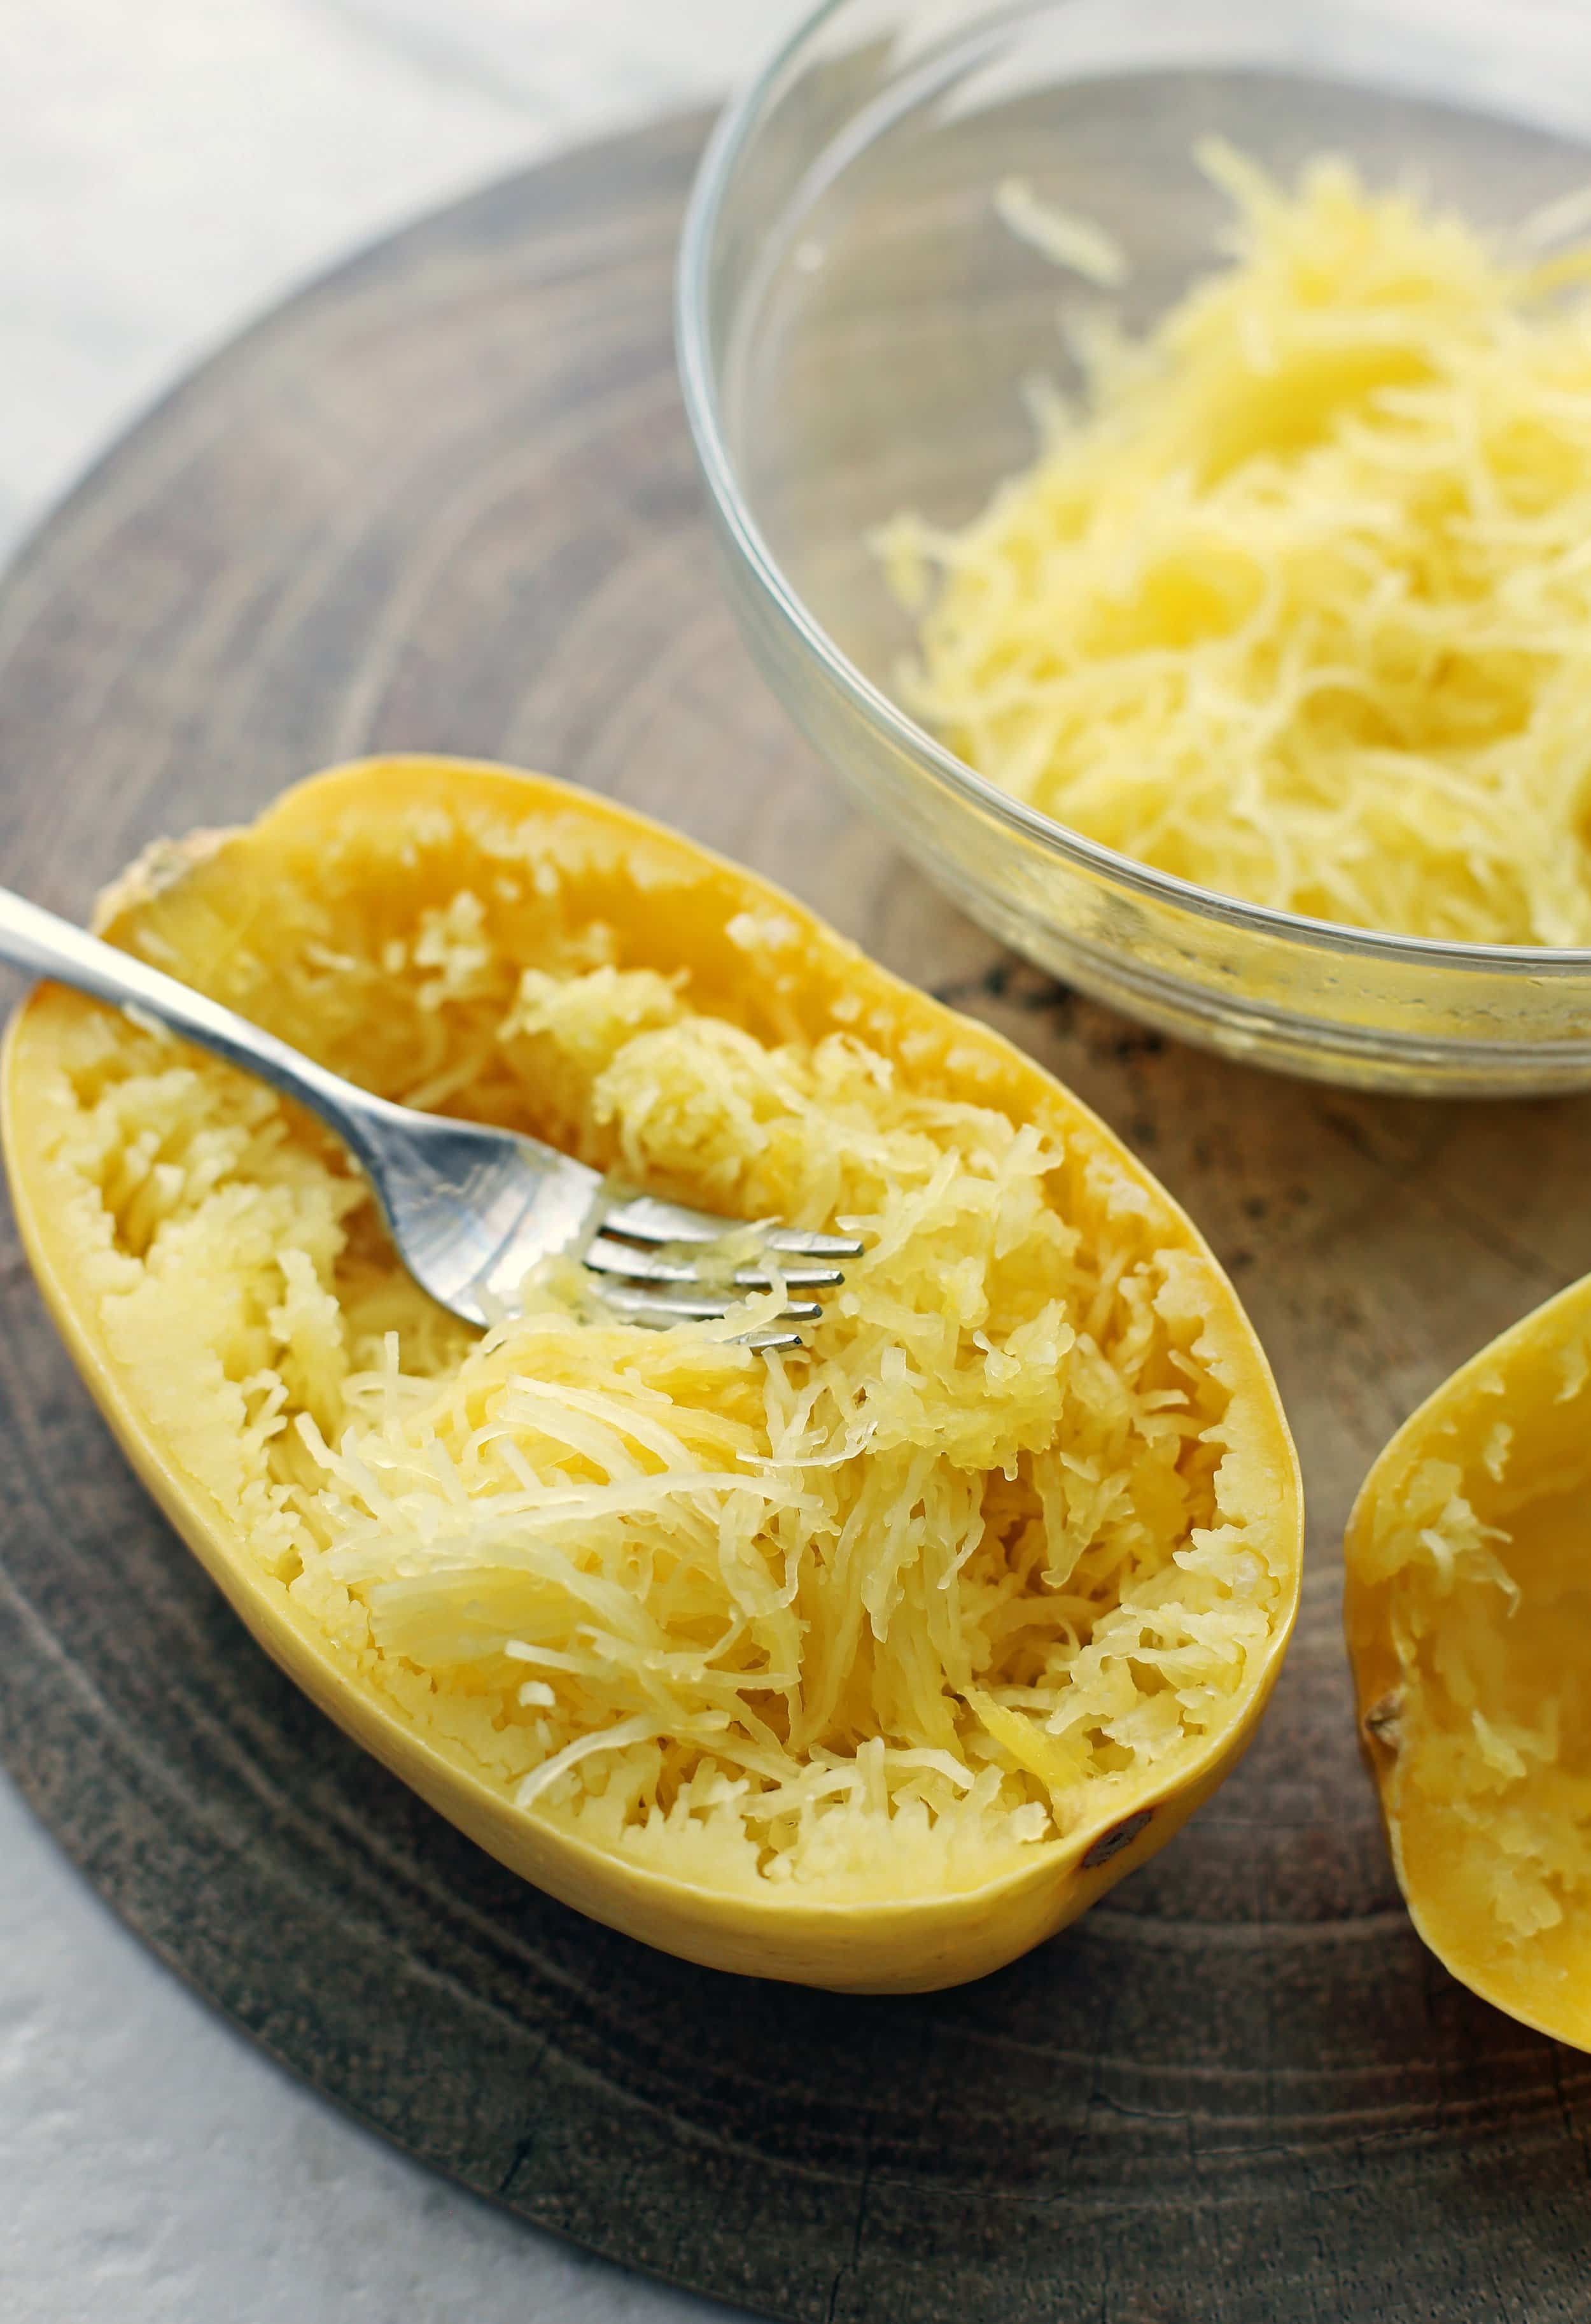 Spaghetti squash strands in a halved squash shell that has been removed with a fork.